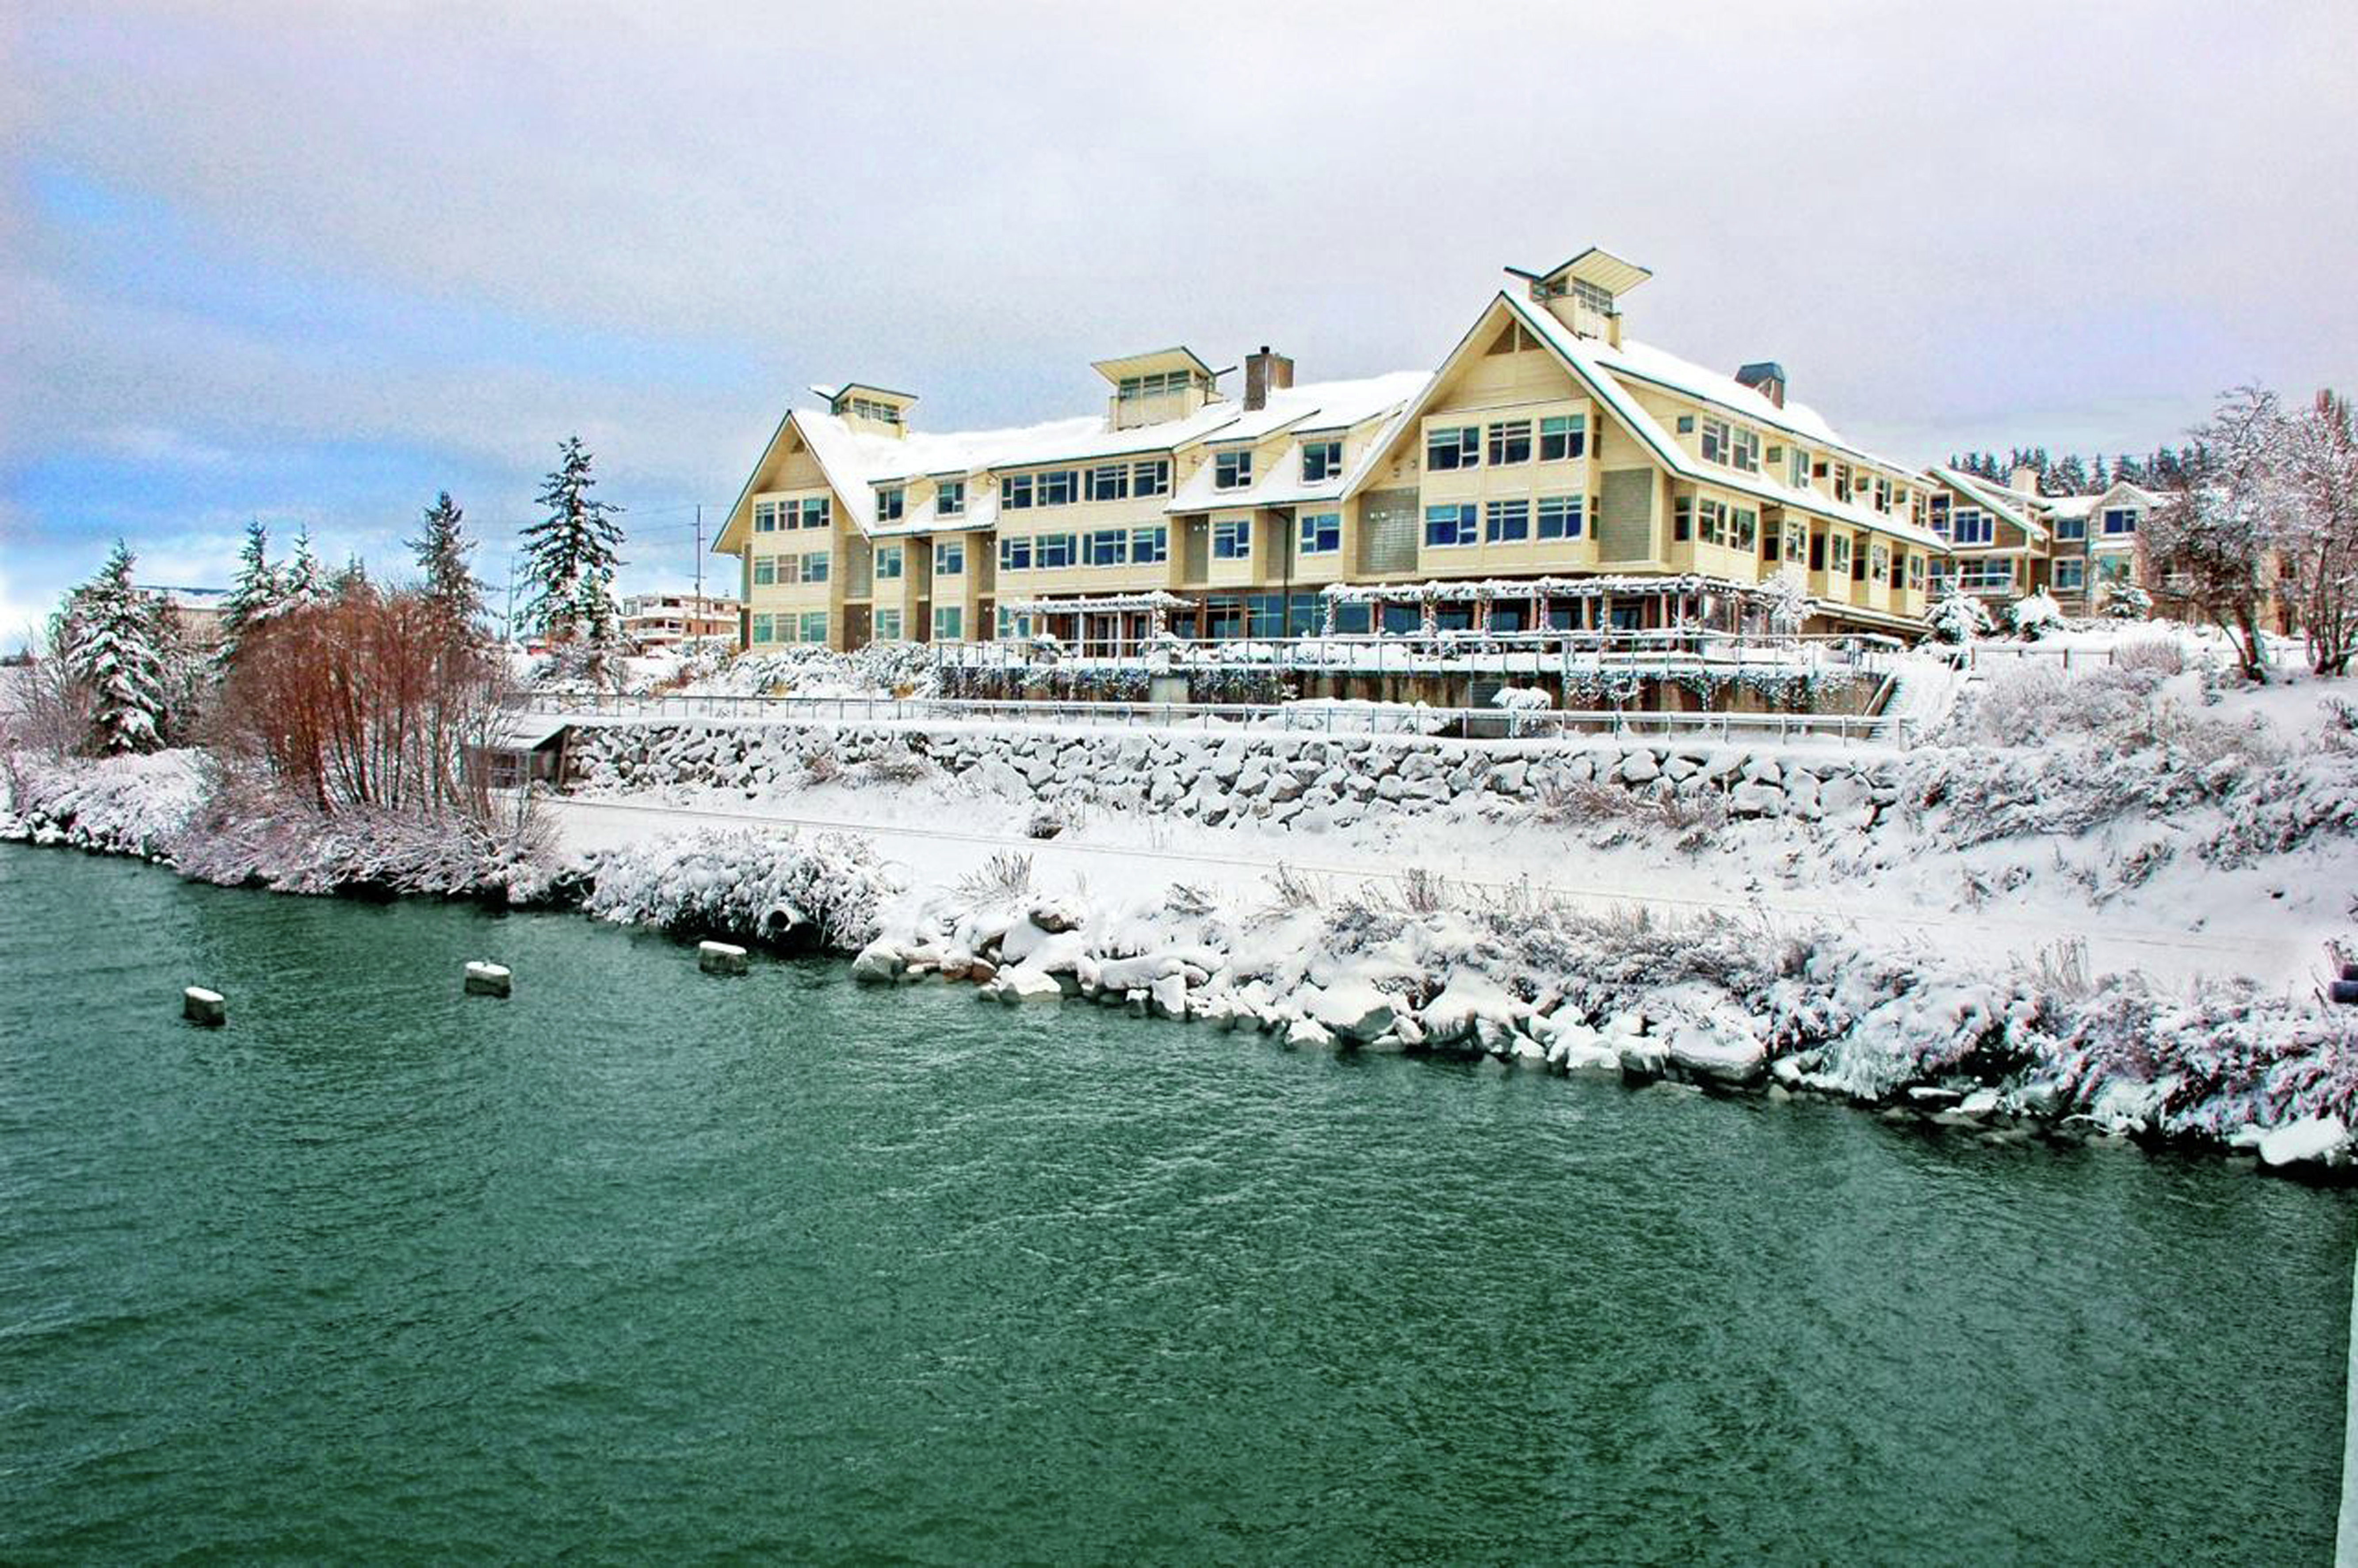 View of Hotel Exterior and Bellingham Bay During Winter